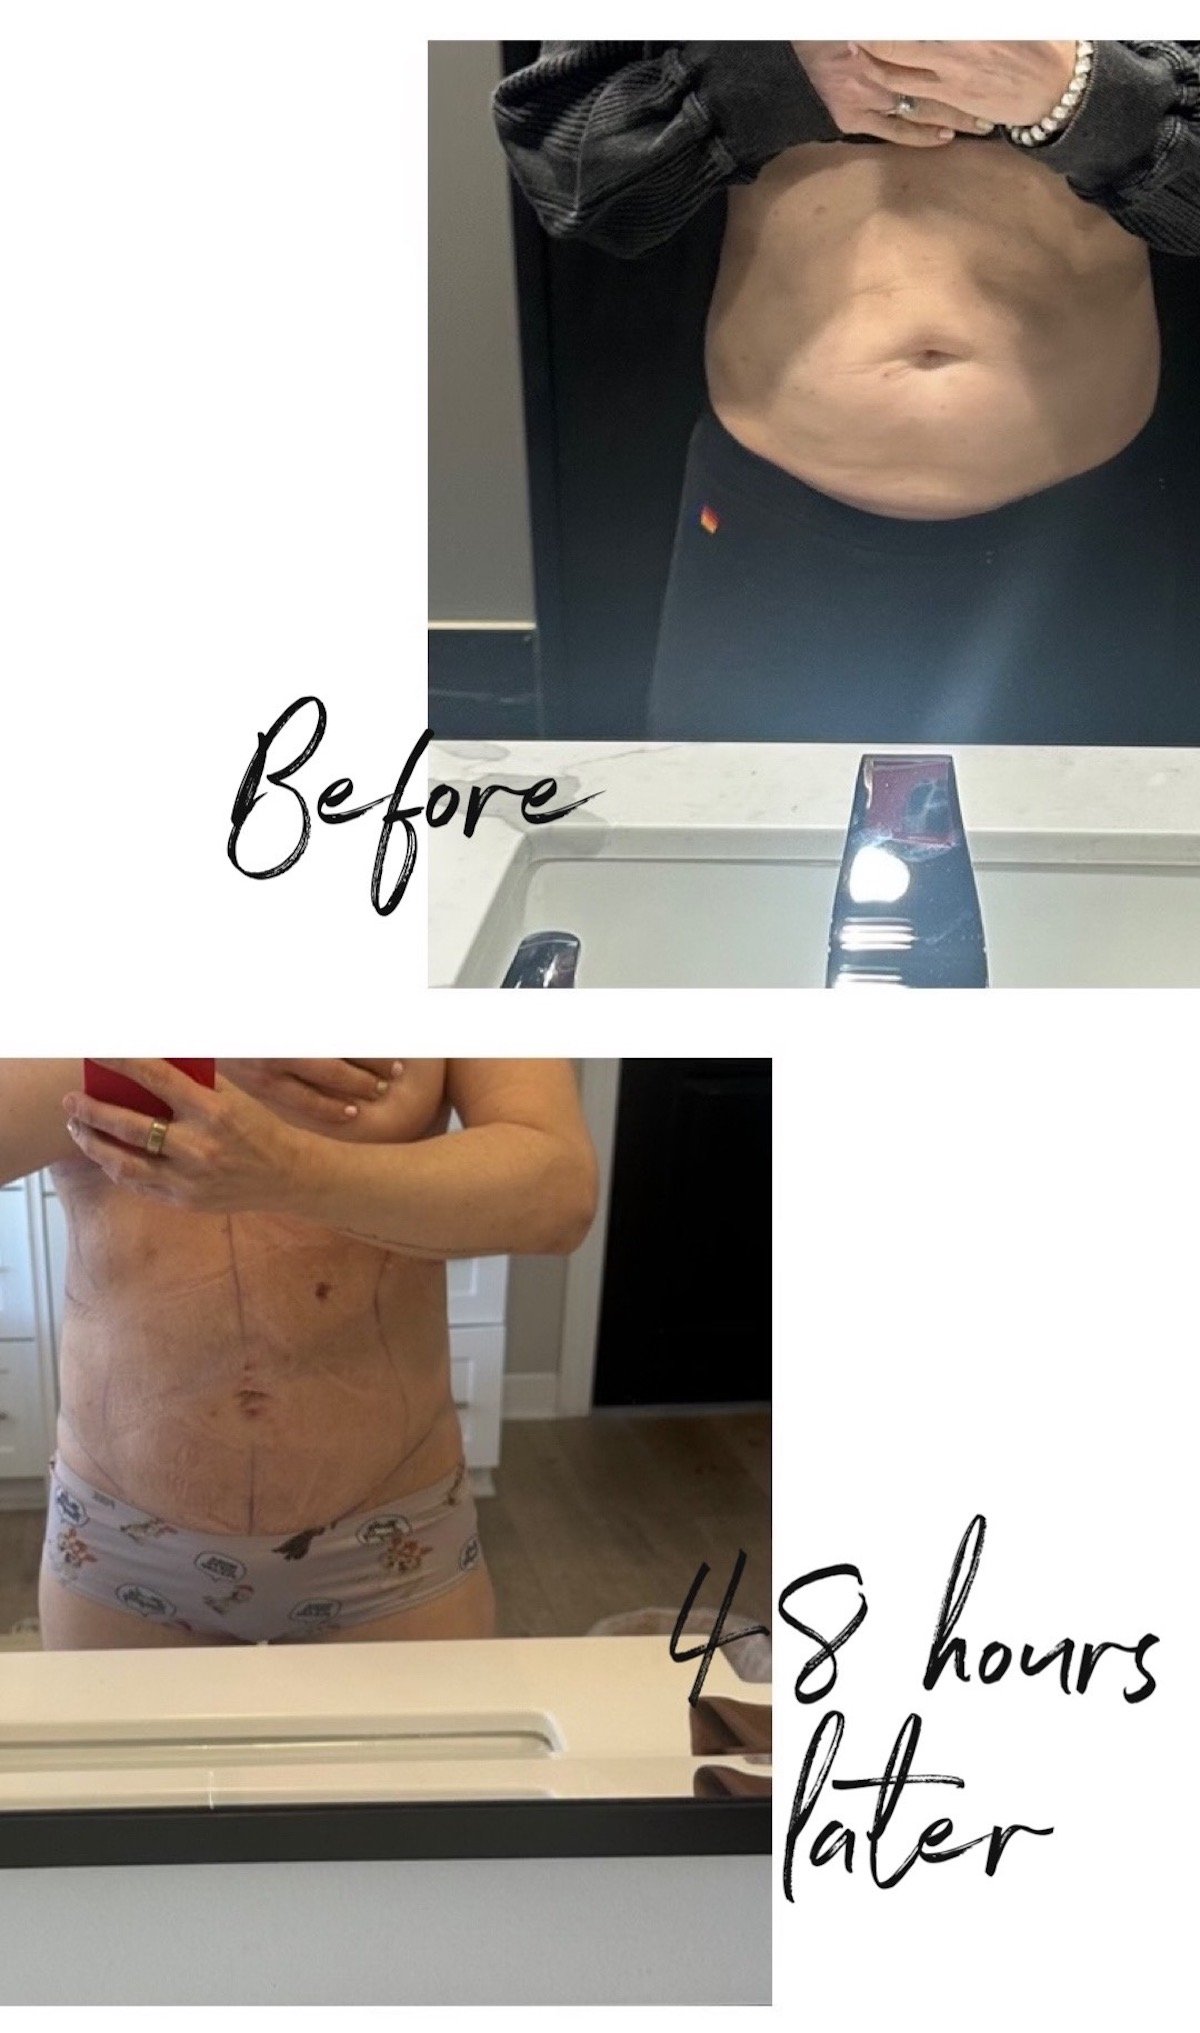 A before and after image of a woman's stomach after the airsculpt procedure.